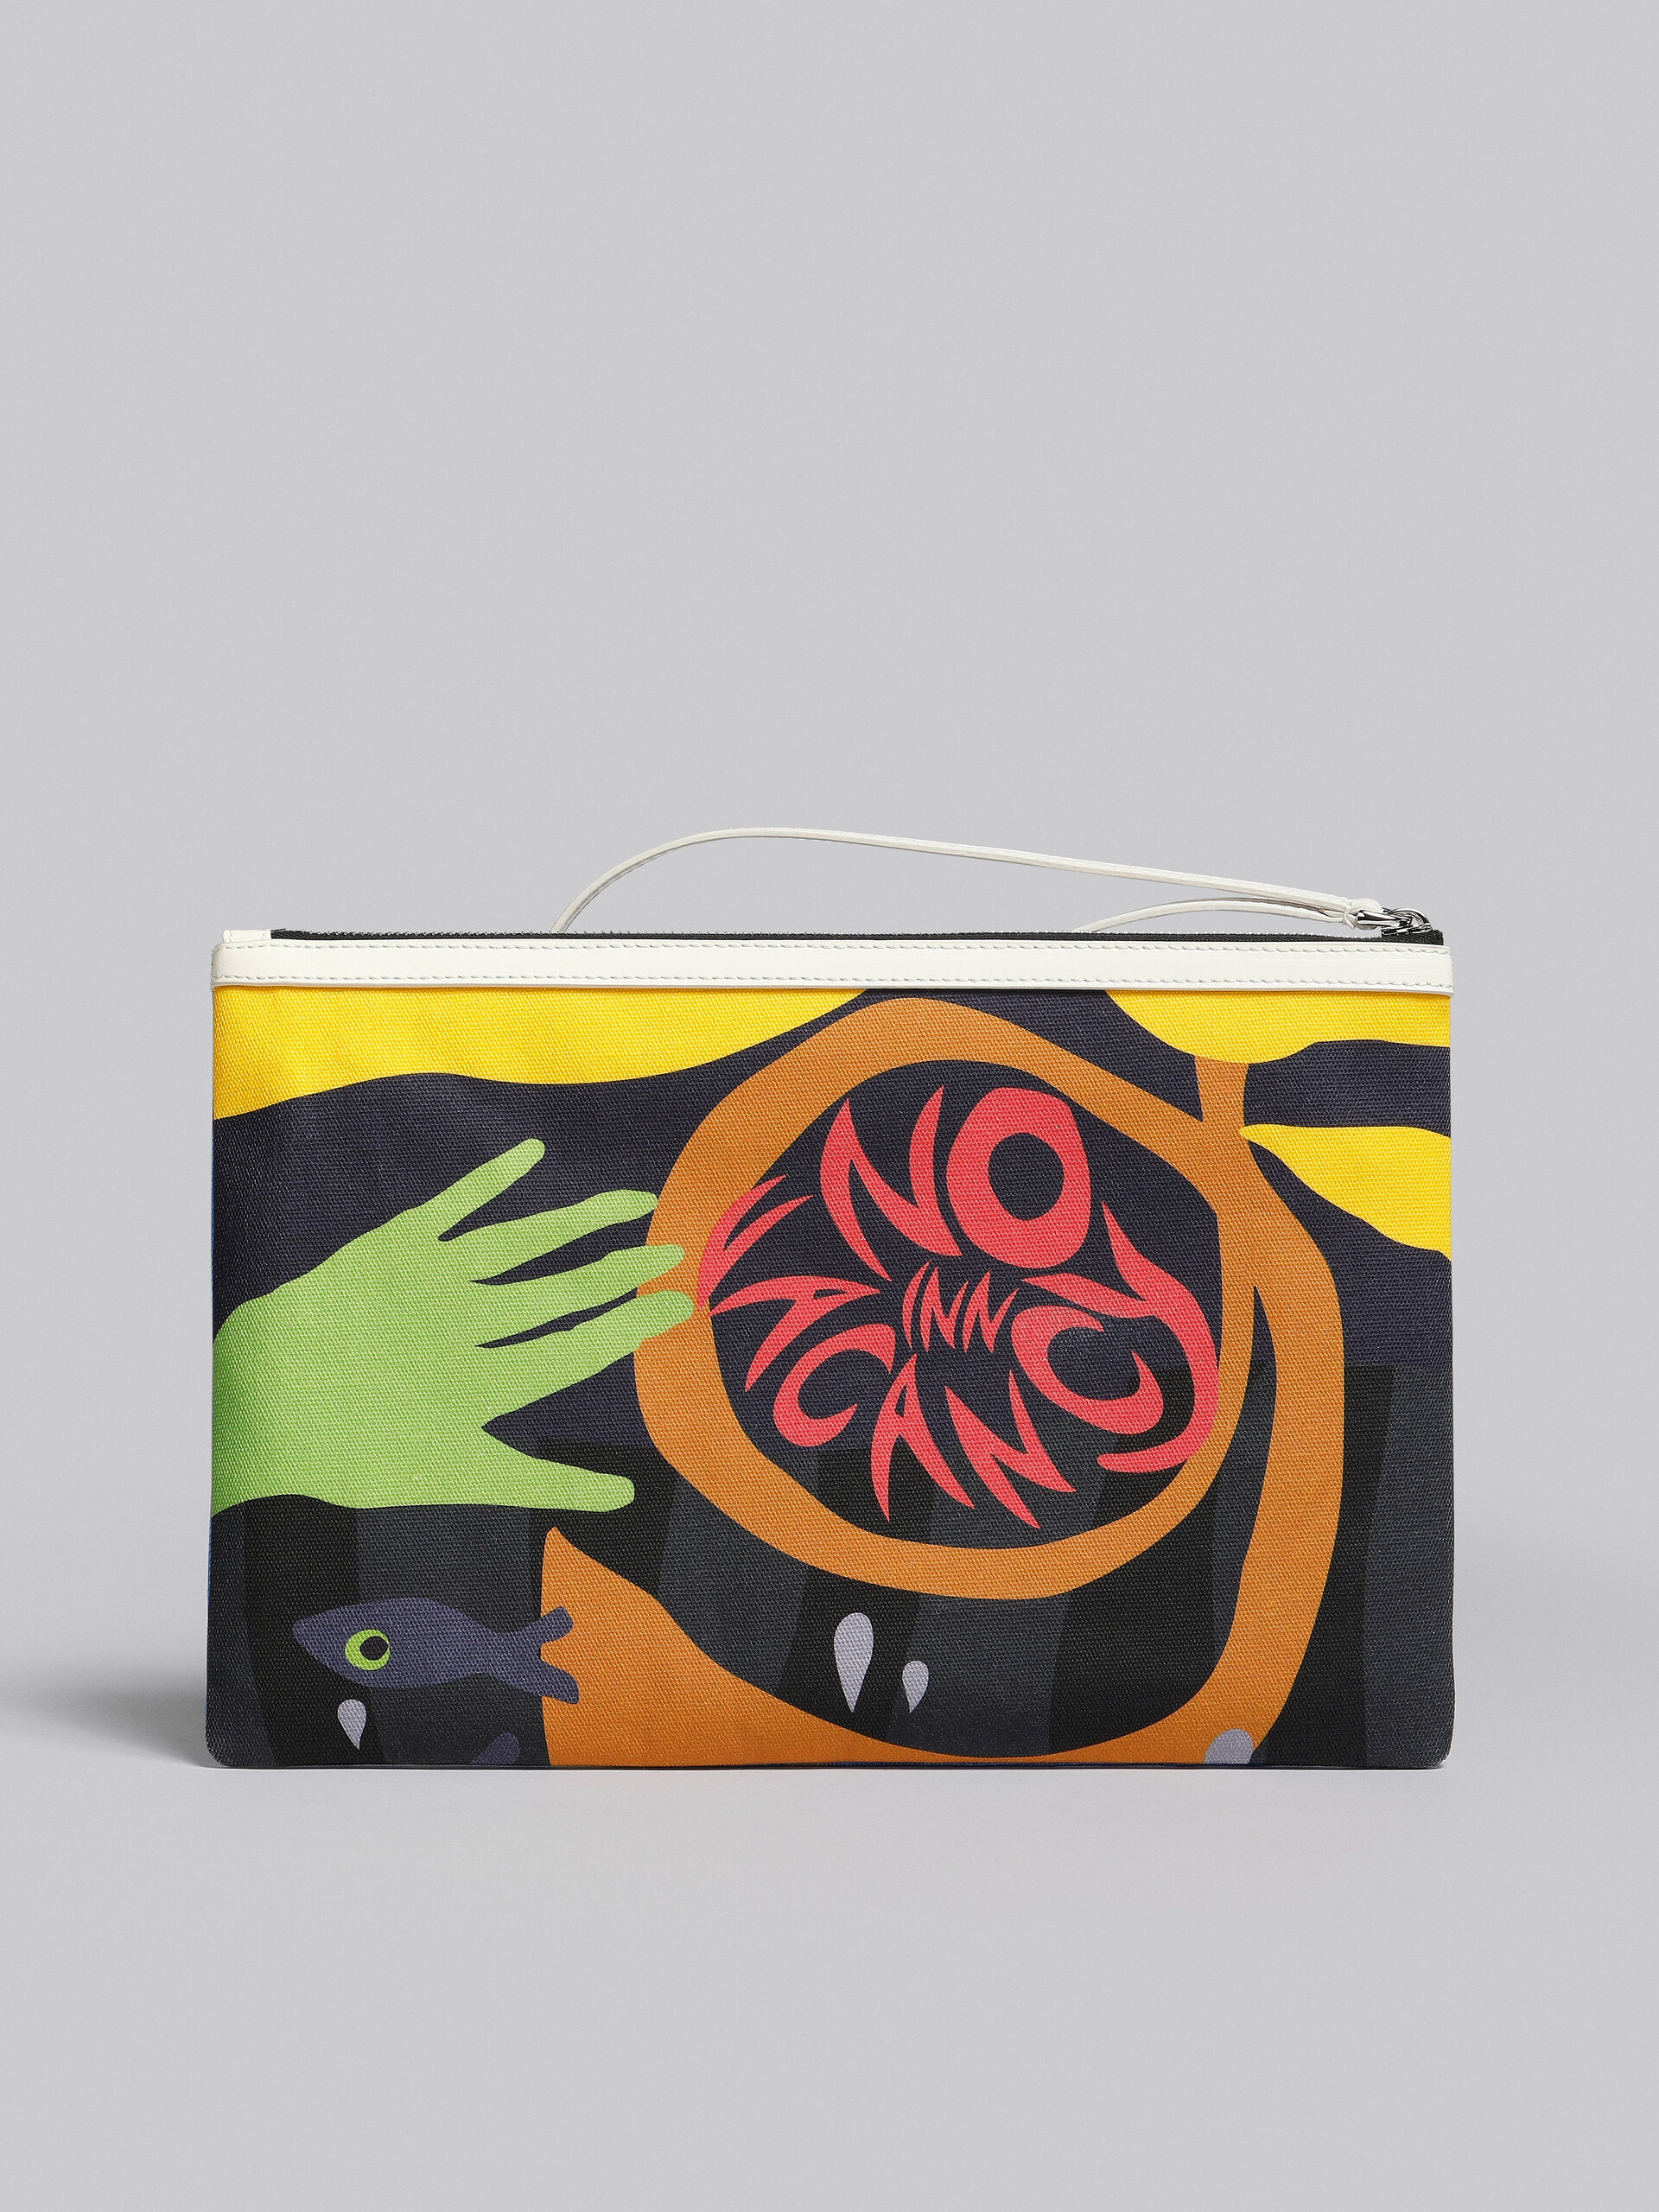 Marni x No Vacancy Inn - Pouch in coated canvas with print - Pochette - Image 3